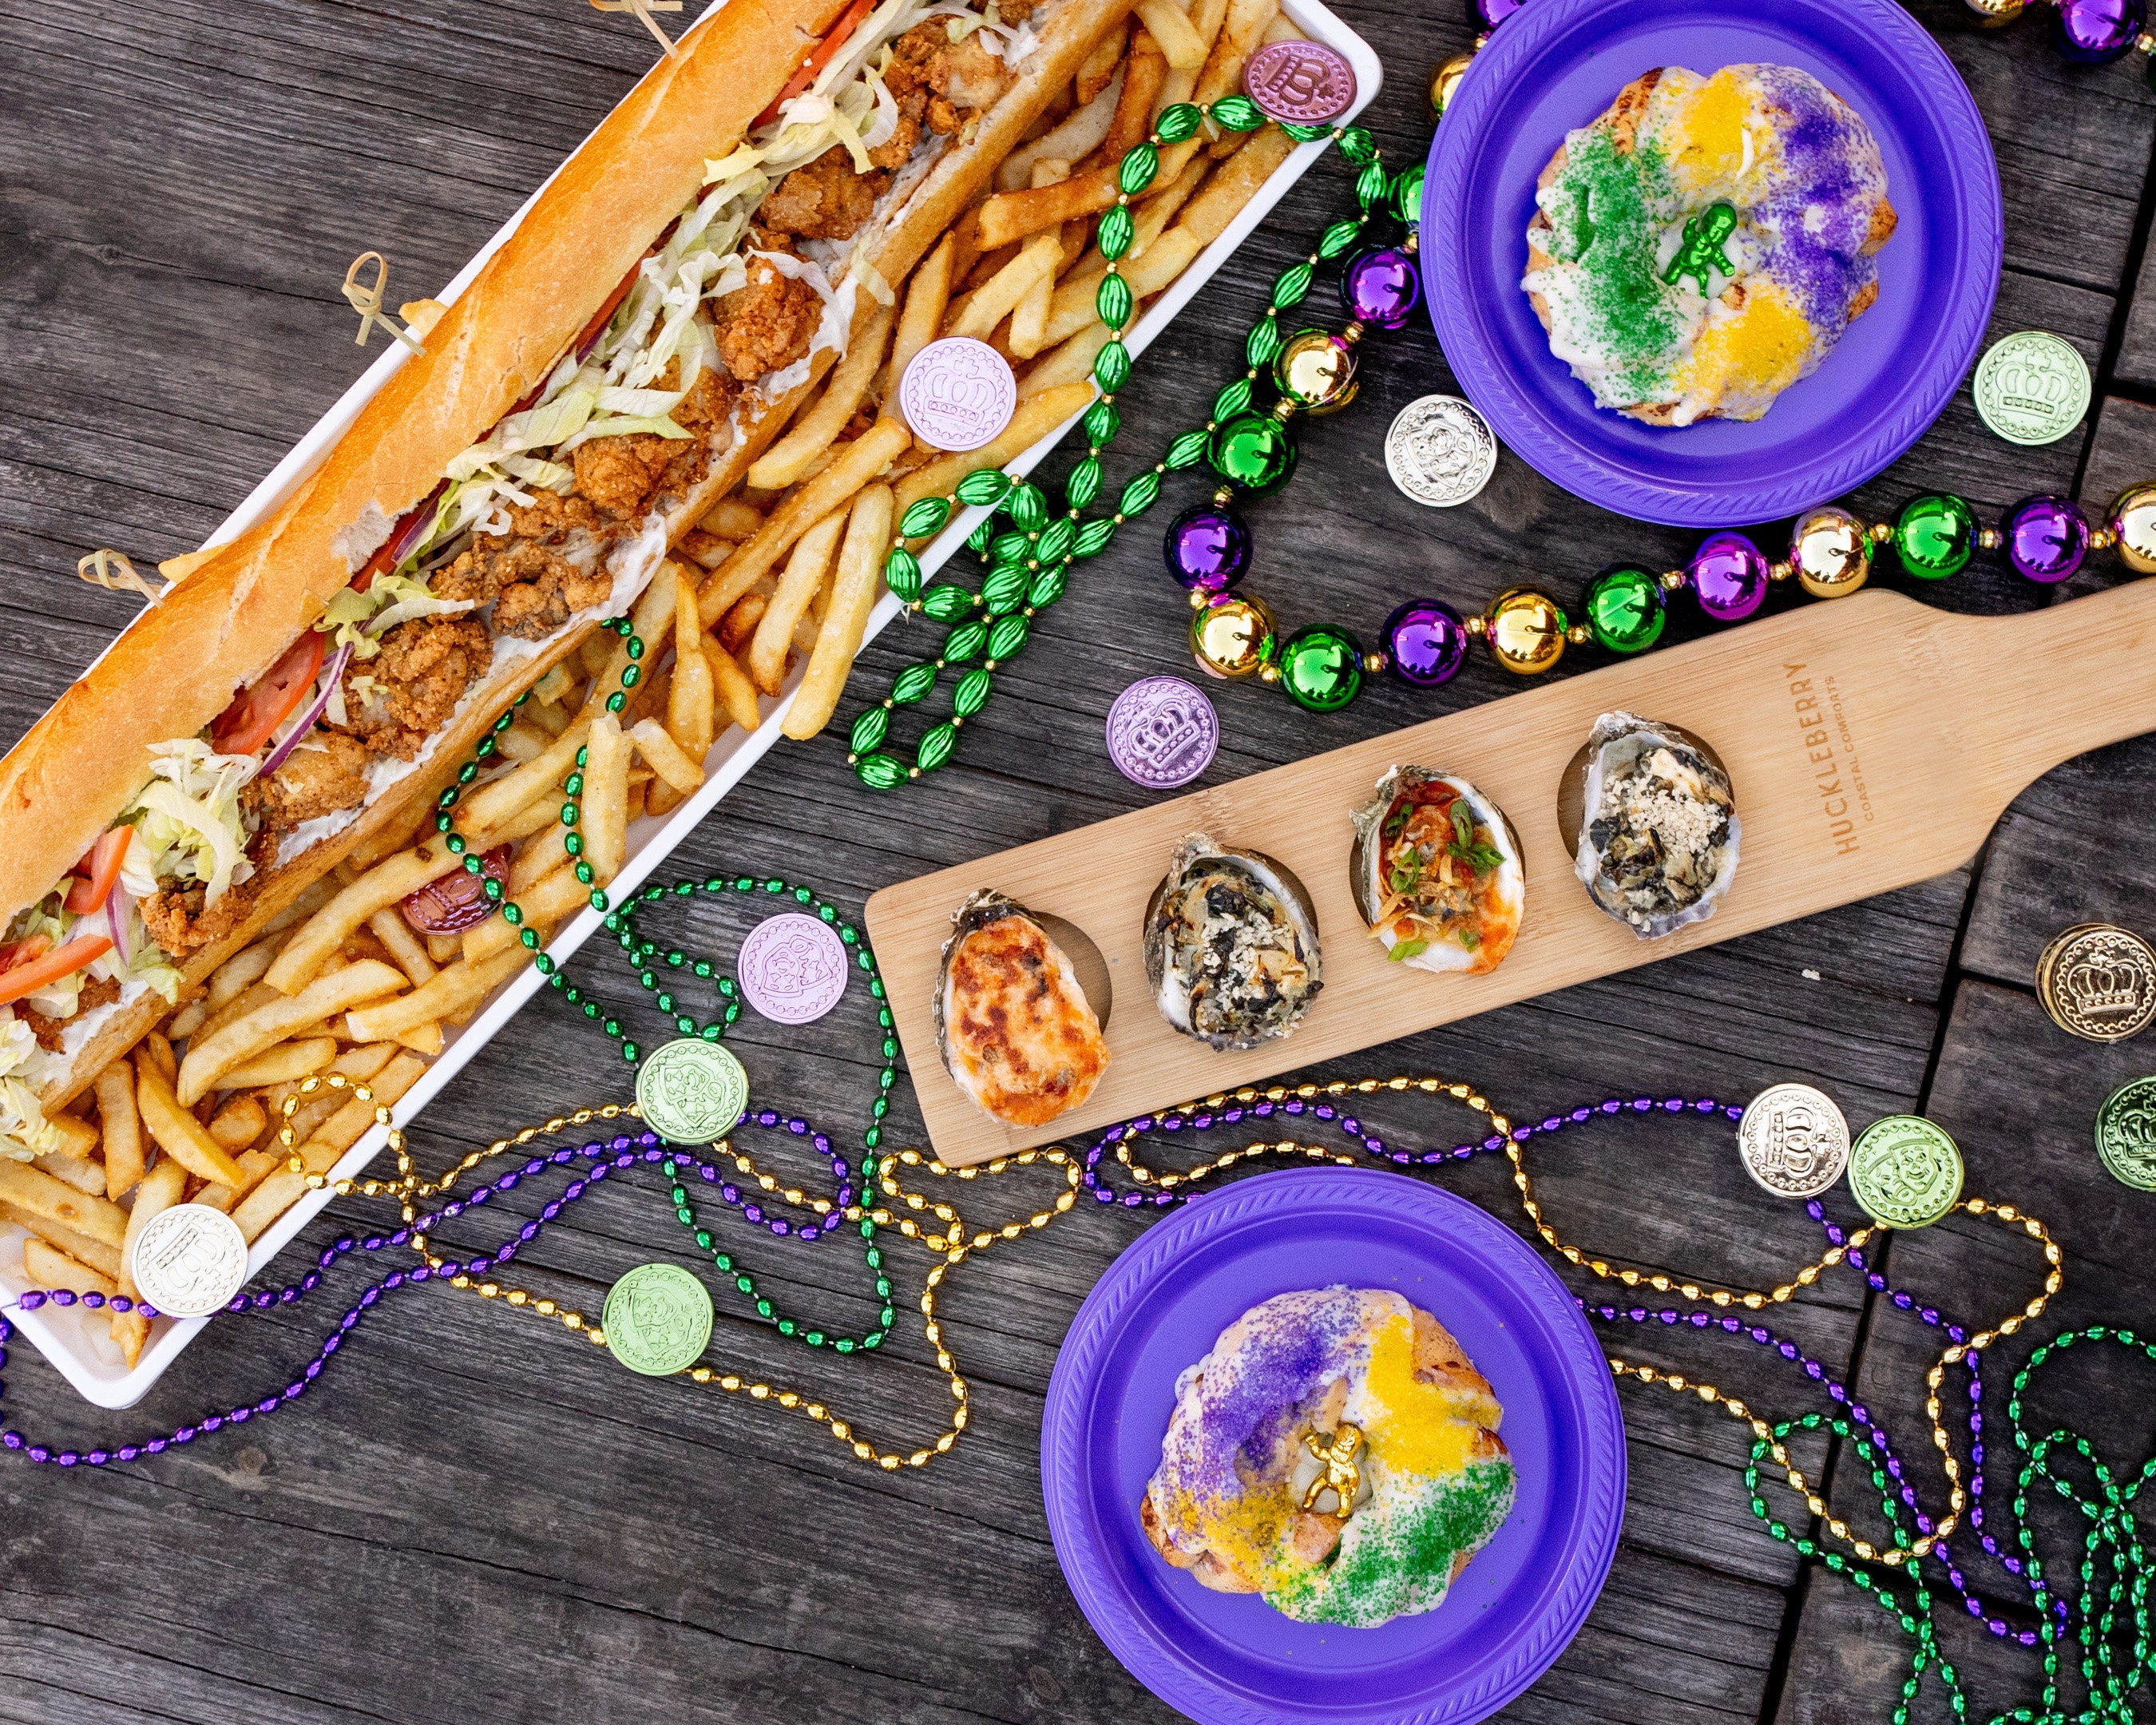 A table of a long sandwich, cakes, and beads.